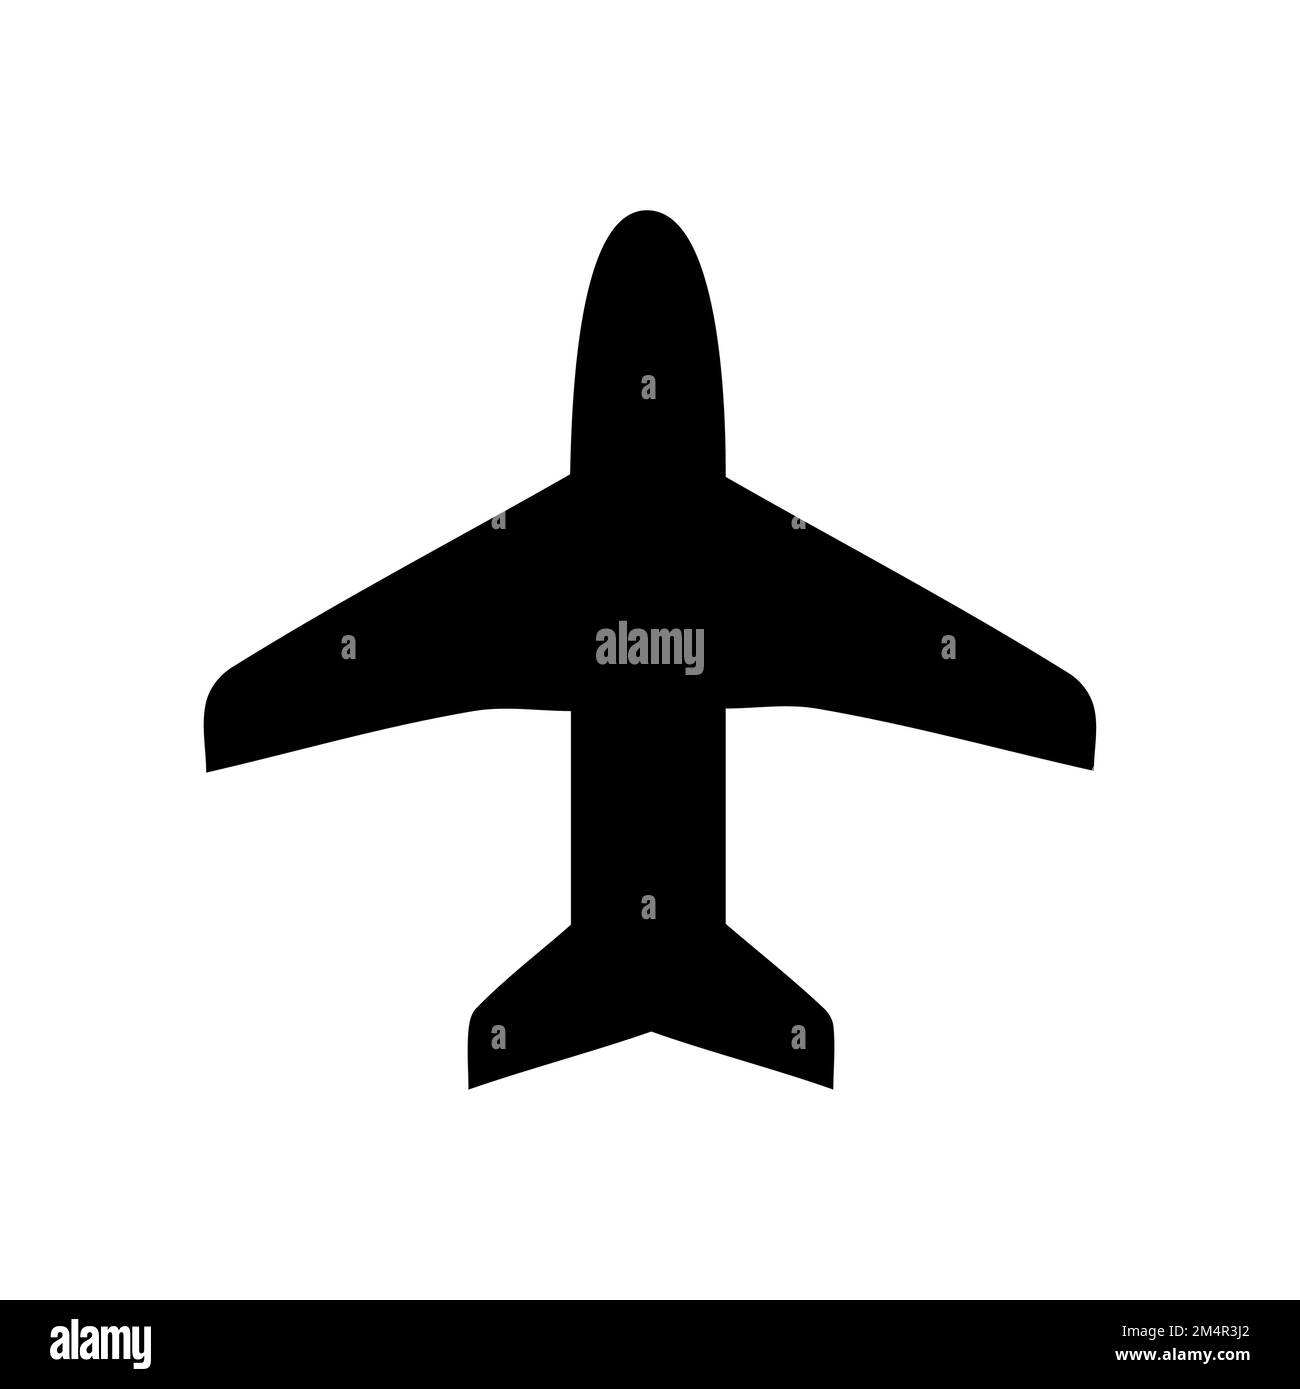 AIRPLANE BLACK SILHOUETTE, AIRCRAFT PICTOGRAM Stock Vector